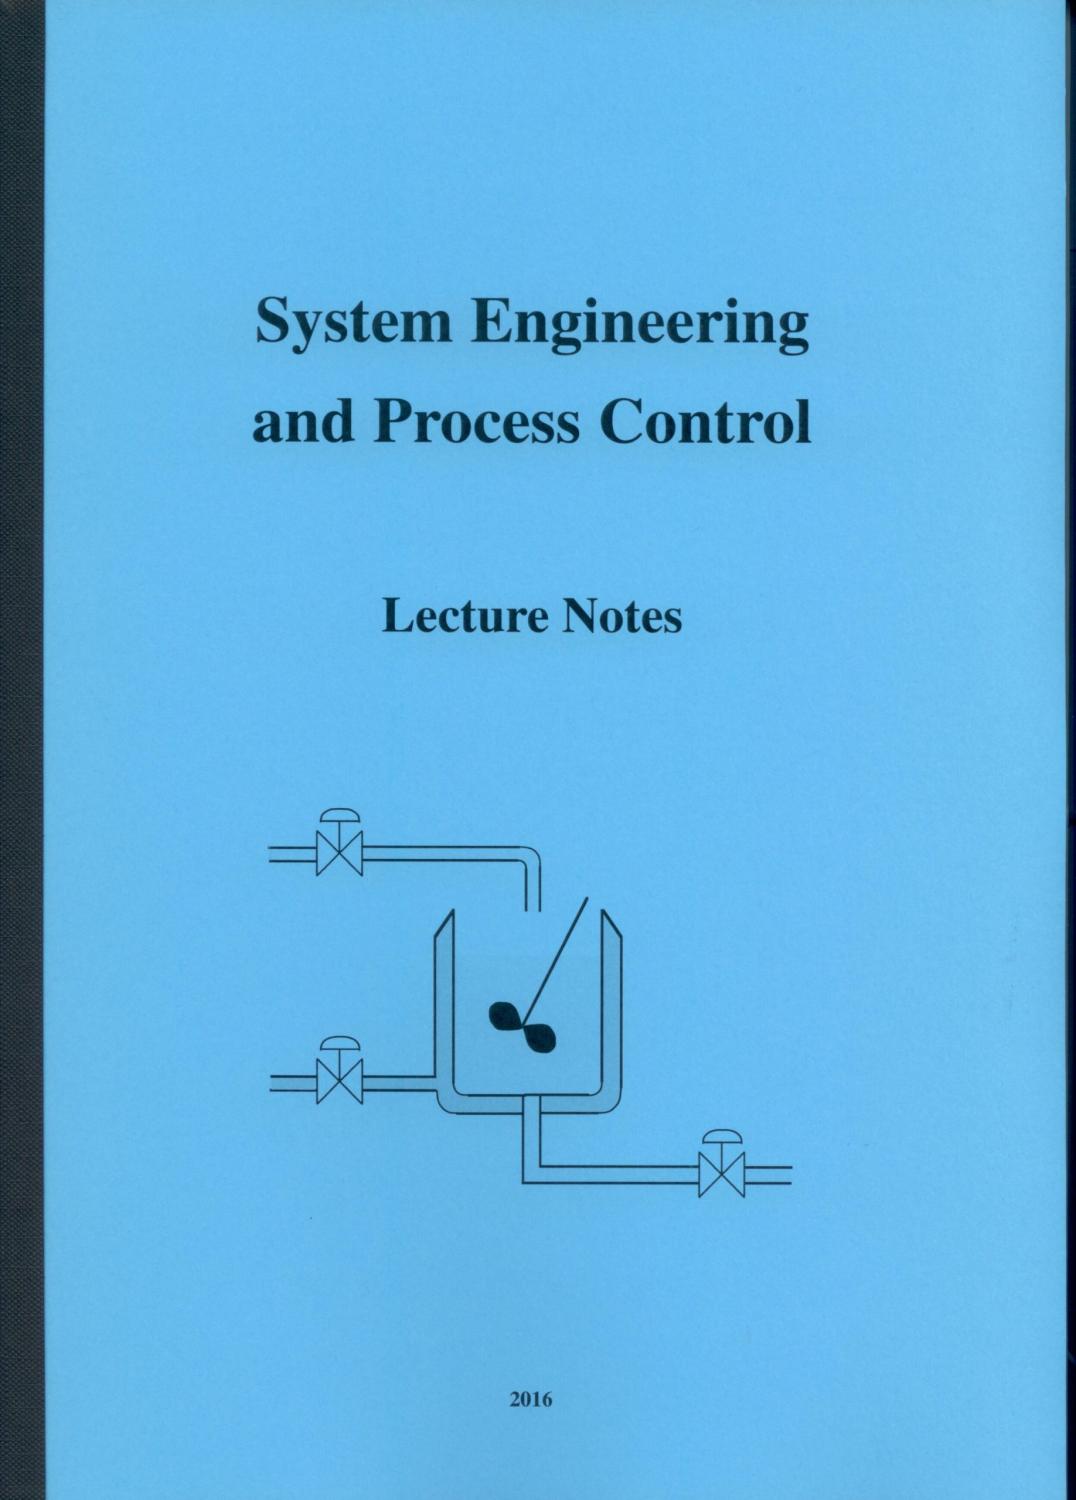 Systems Engineering and Process Control, Lecture Notes, 2016